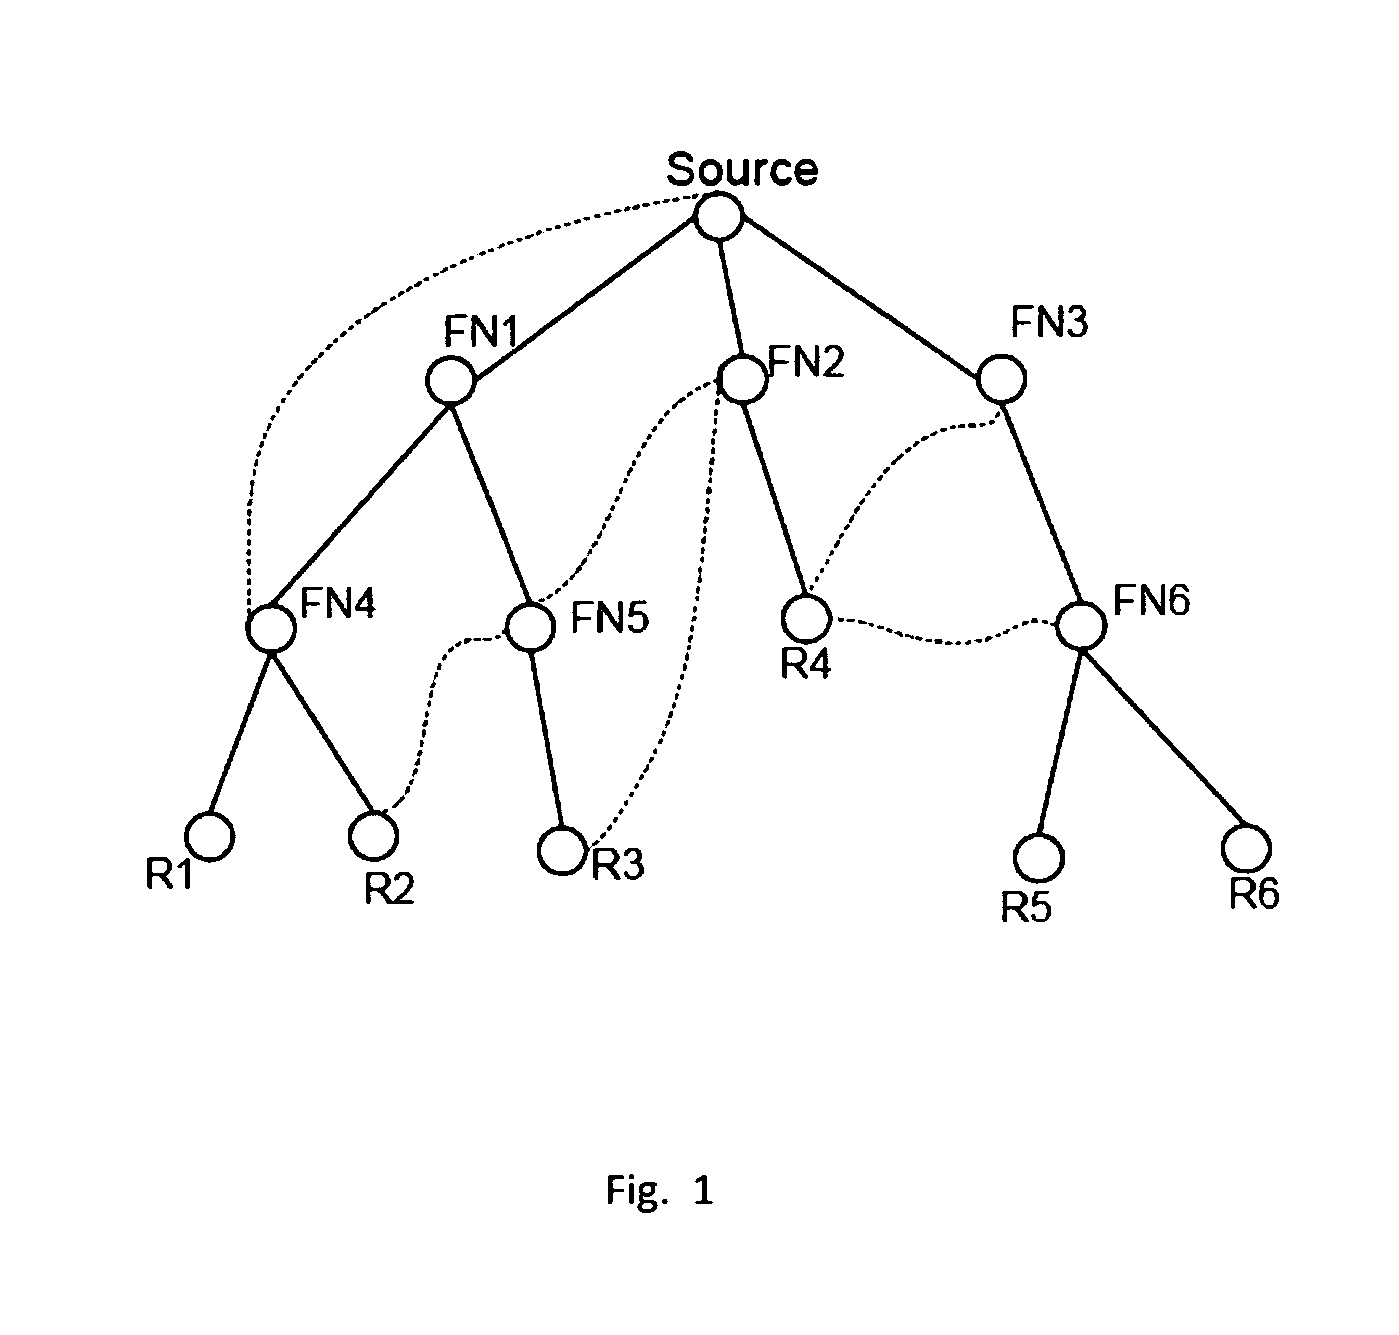 Method and apparatus for hop-by-hop reliable multicast in wireless networks